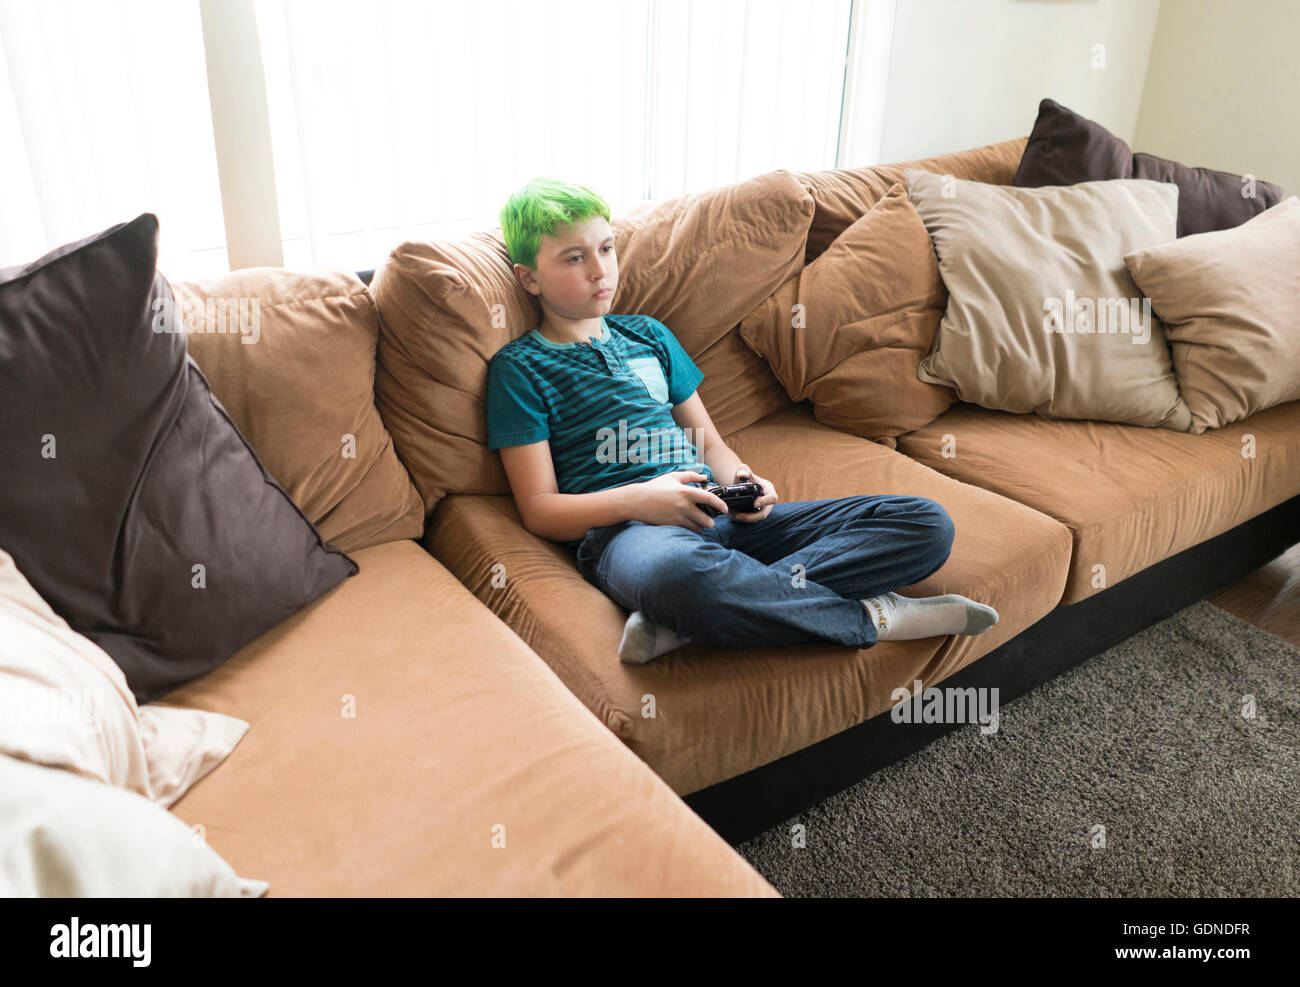 Boy playing video game on sofa Stock Photo